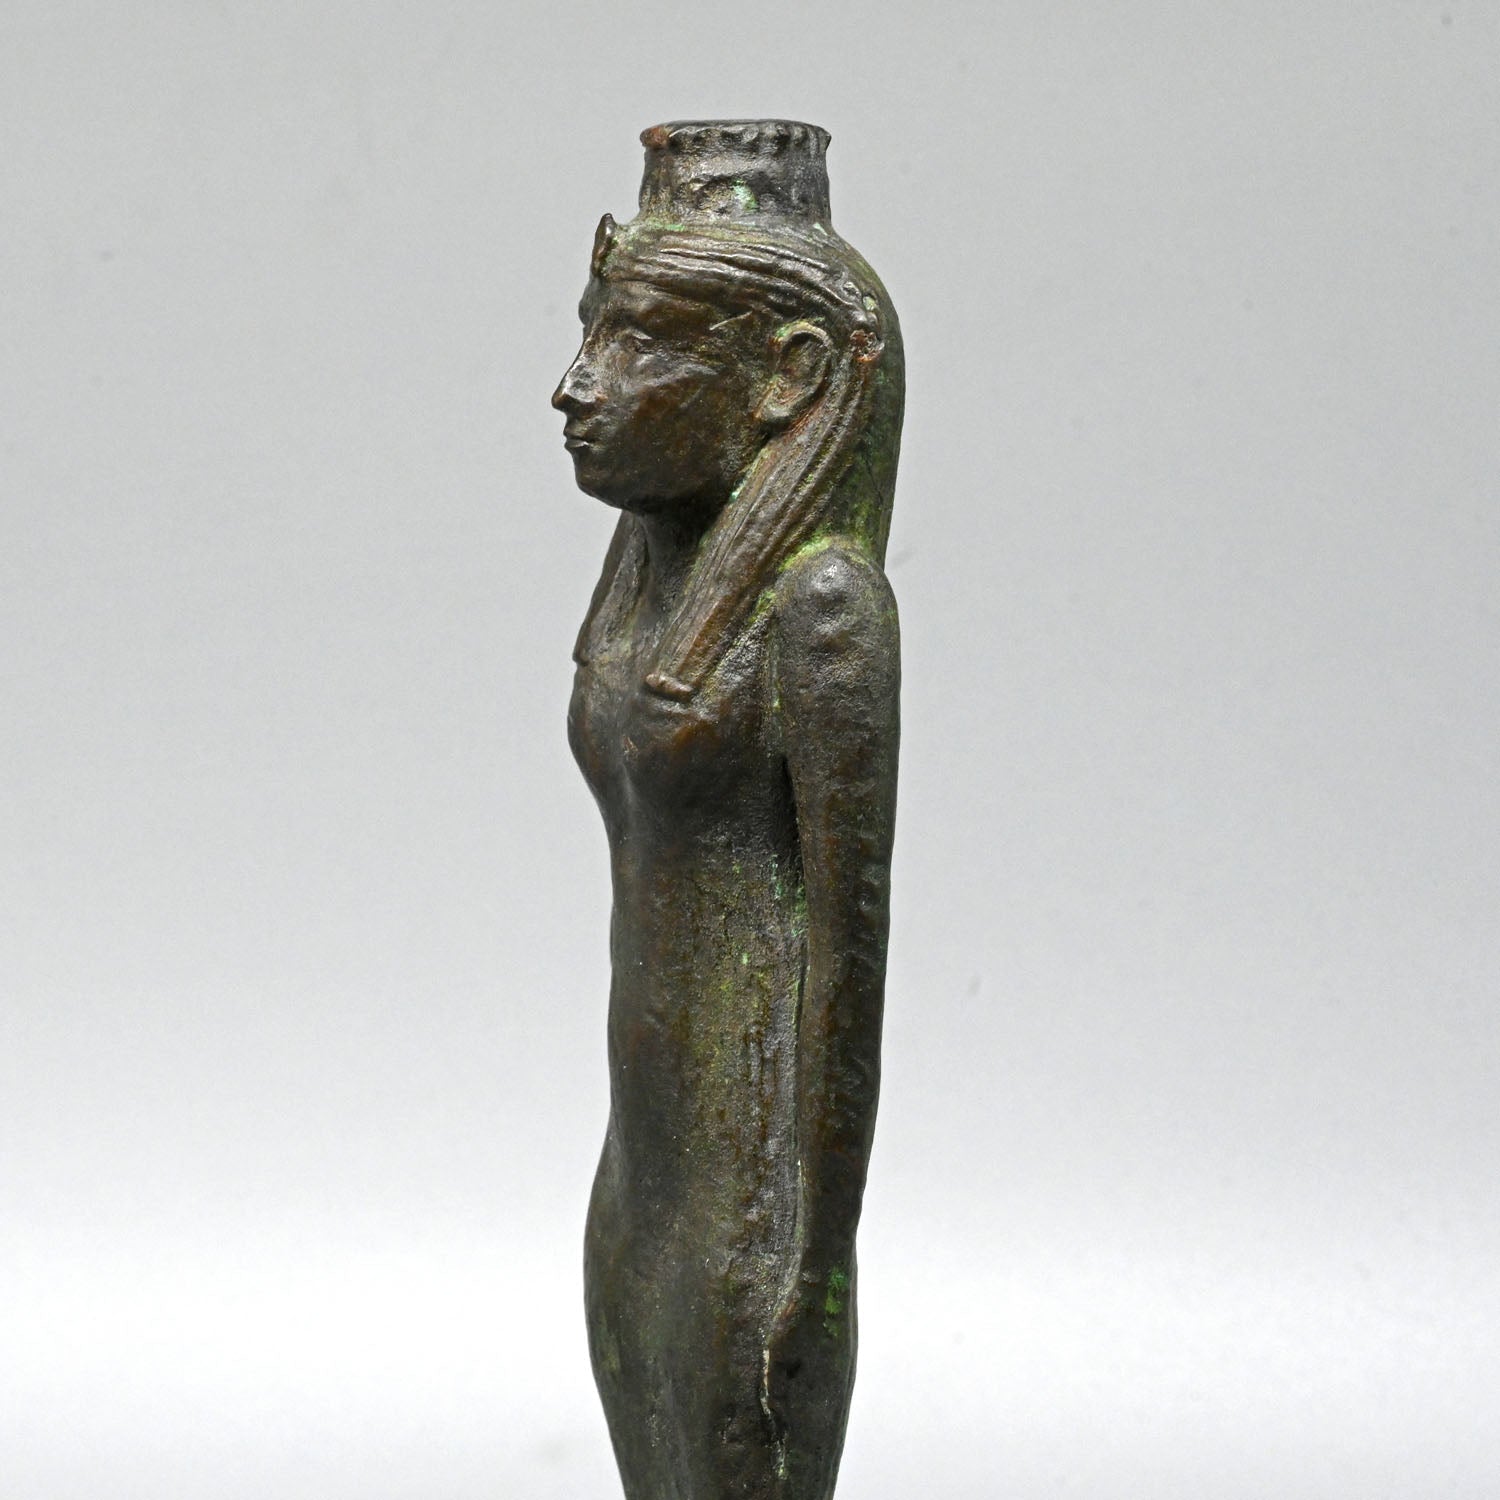 A large Egyptian Bronze Figure of Nephthys, Late - Ptolemaic Period, ca. 664 - 30 BCE